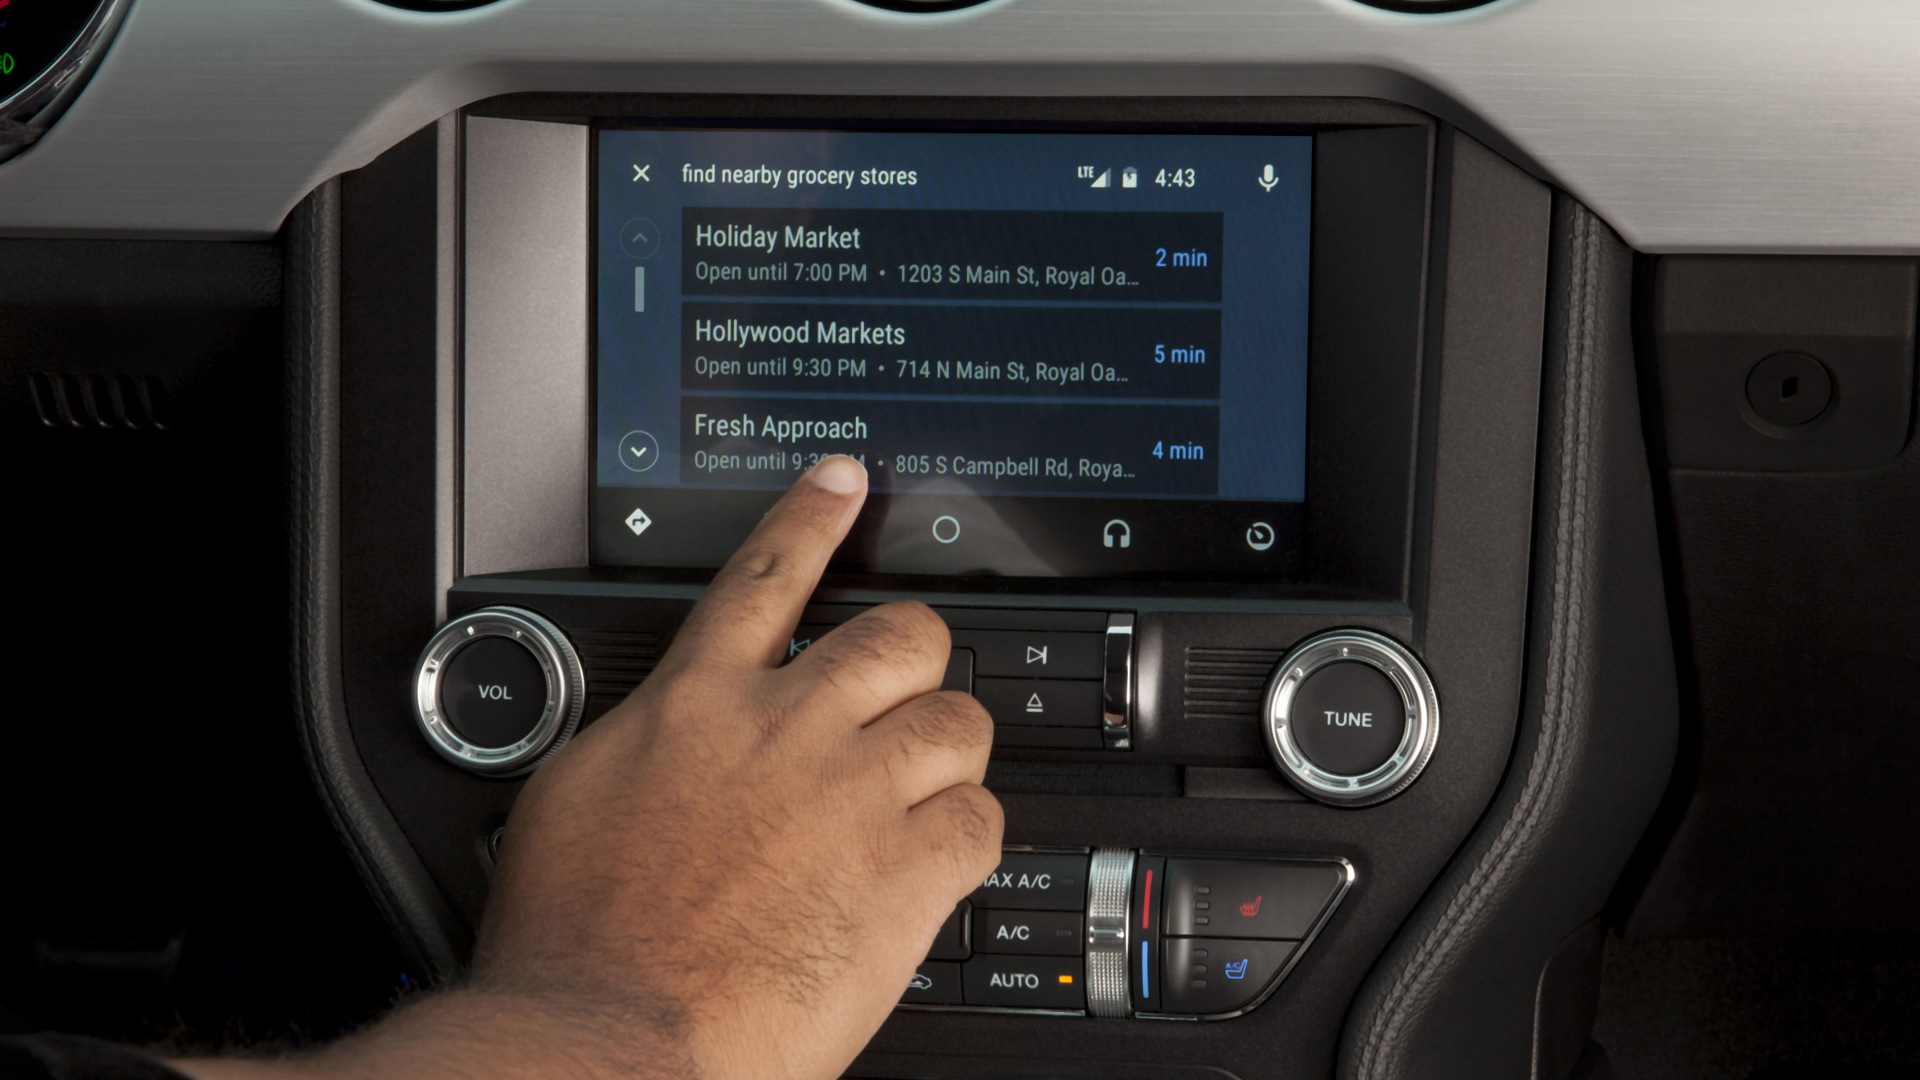 Ford Sync 3 infotainment system